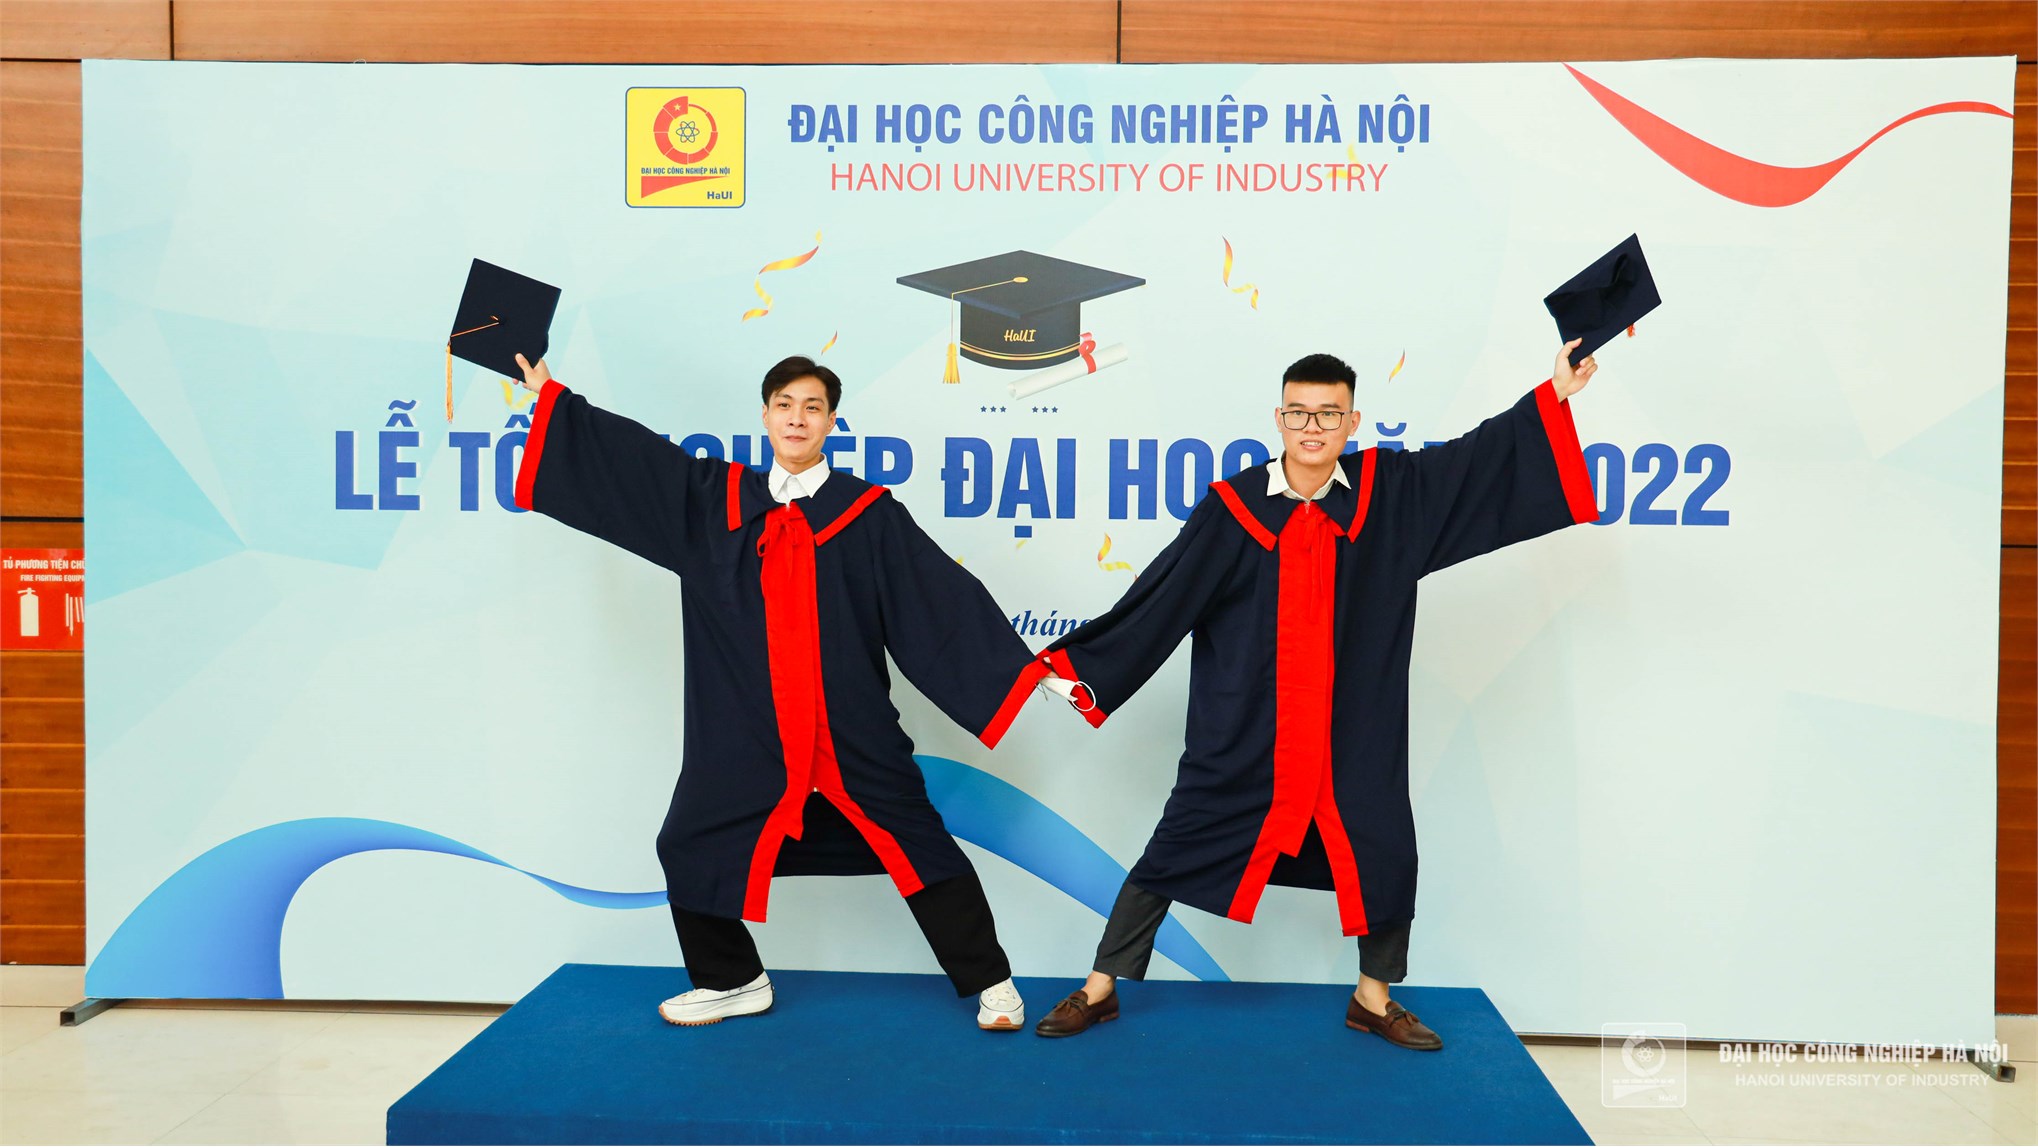 Memorable moments of Hanoi University of Industry students at the graduation ceremony